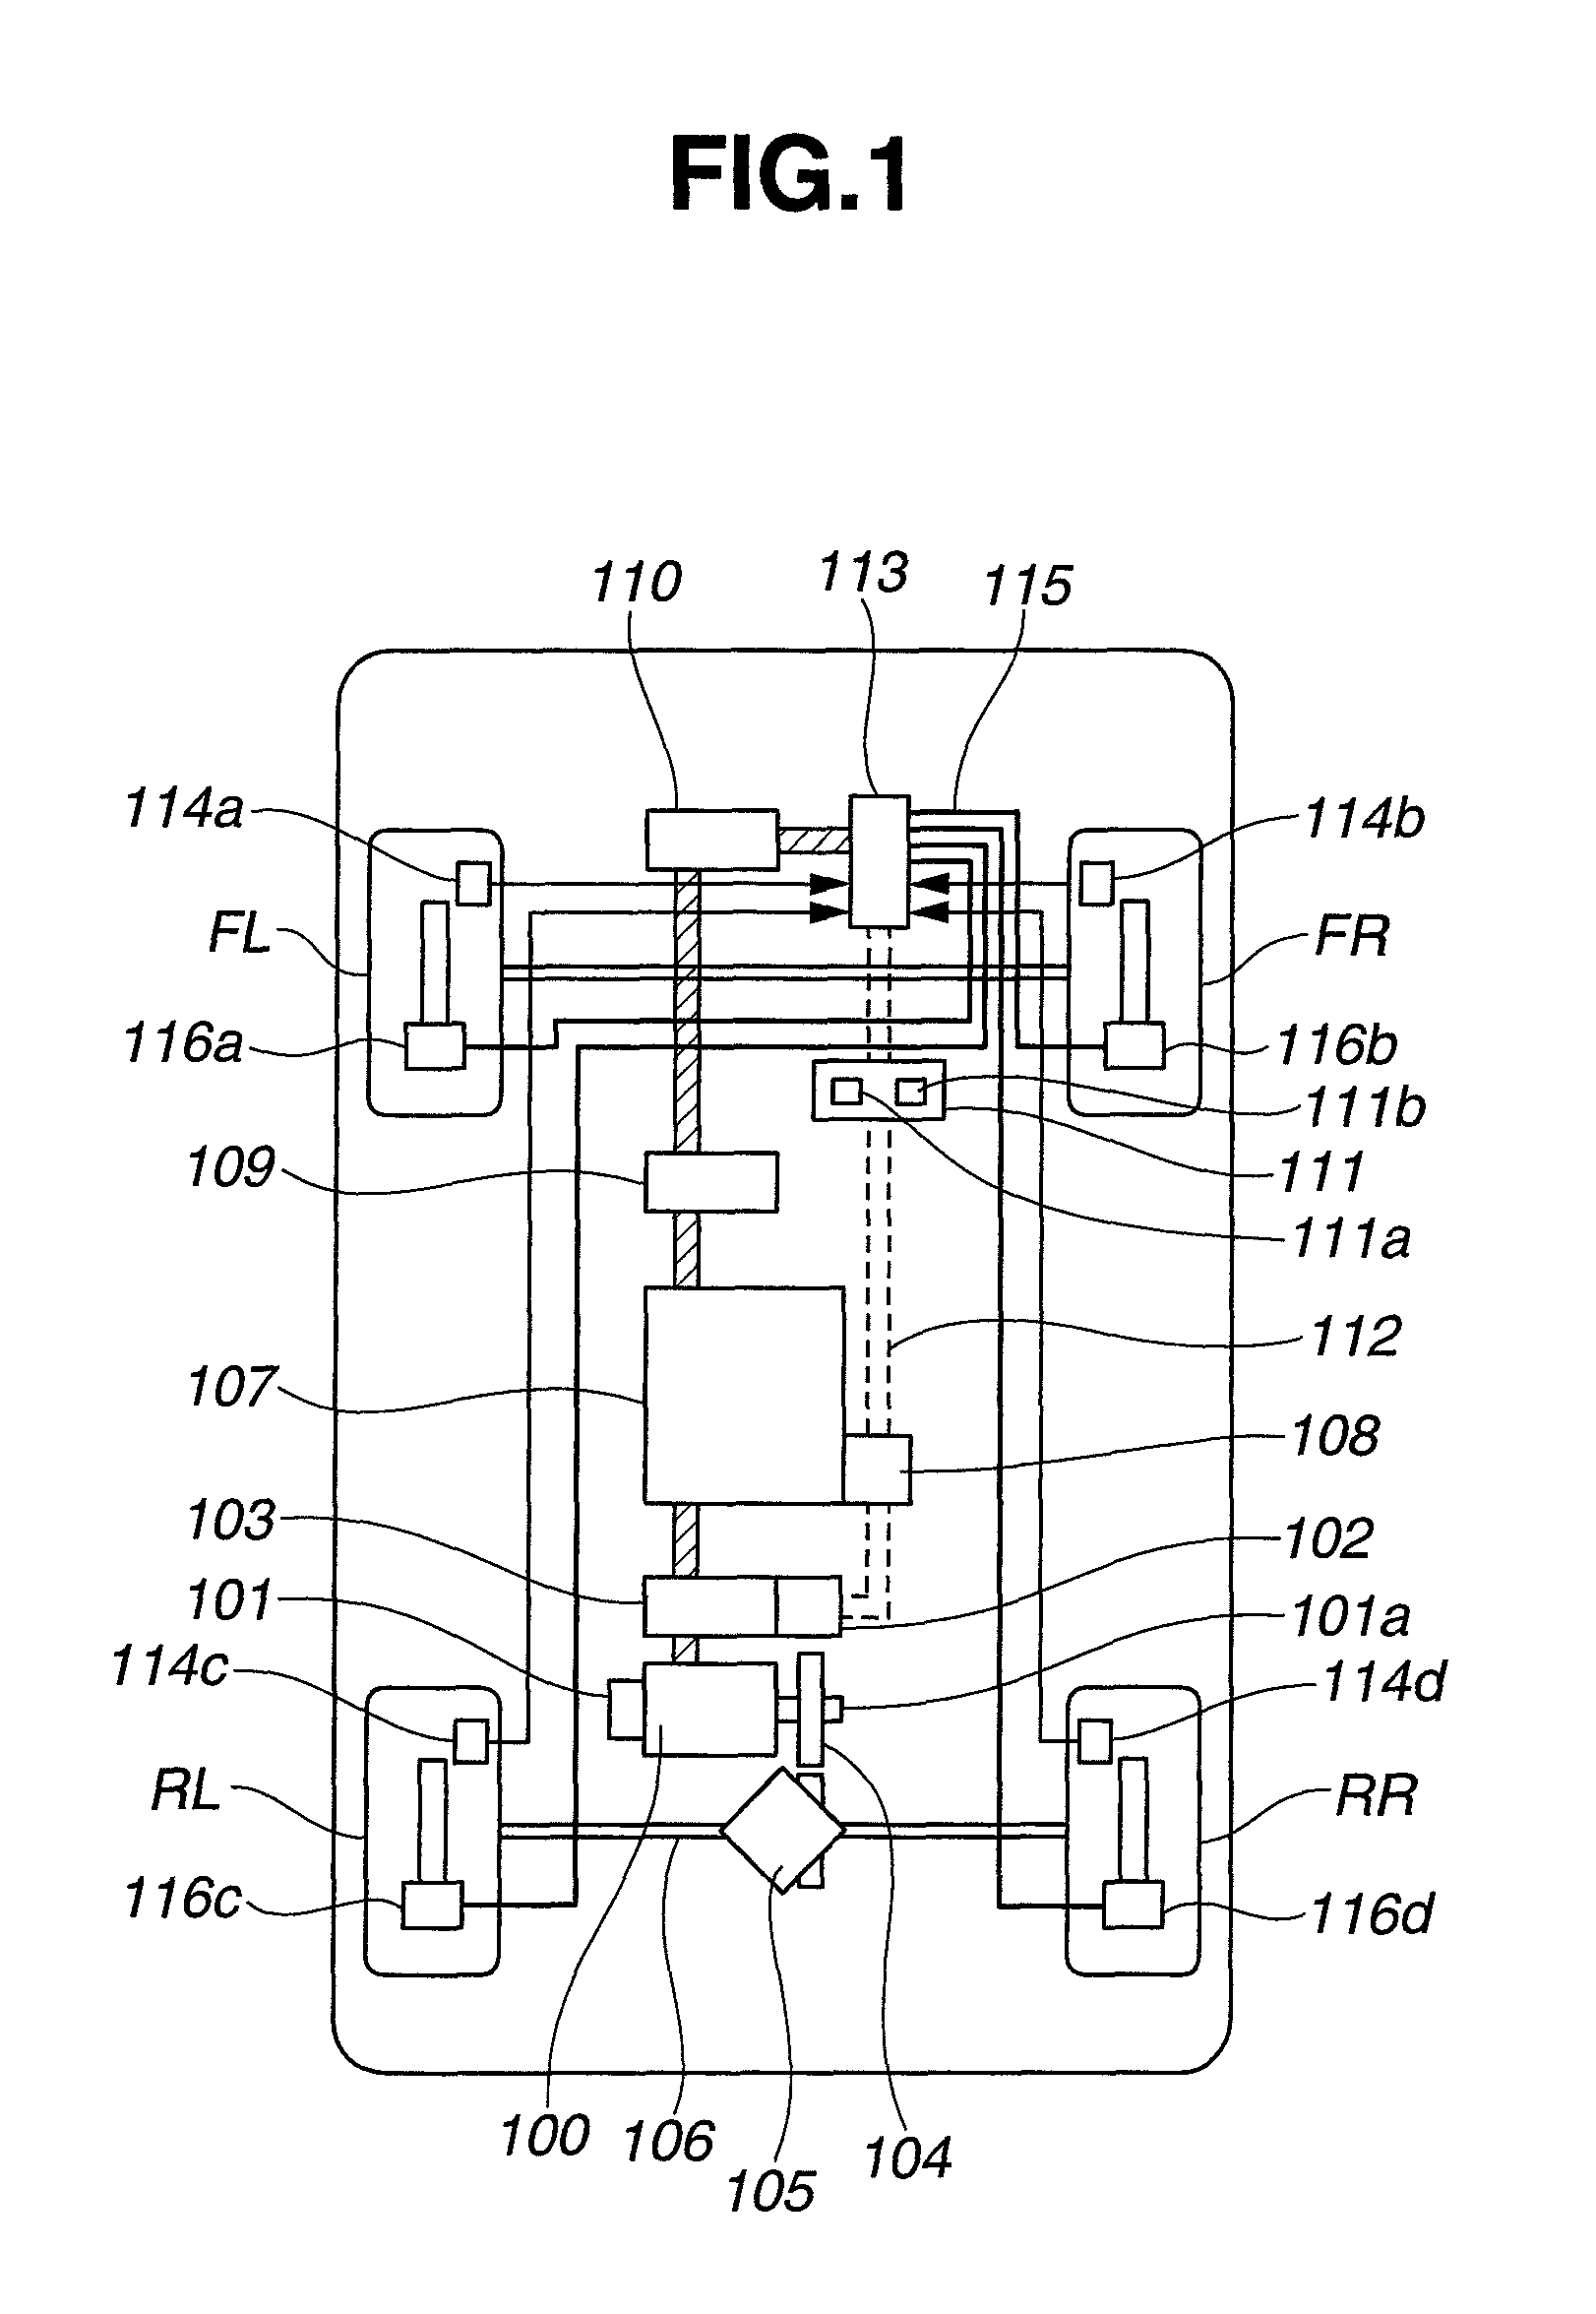 Torque control system for suppressing vibration in an electric vehicle